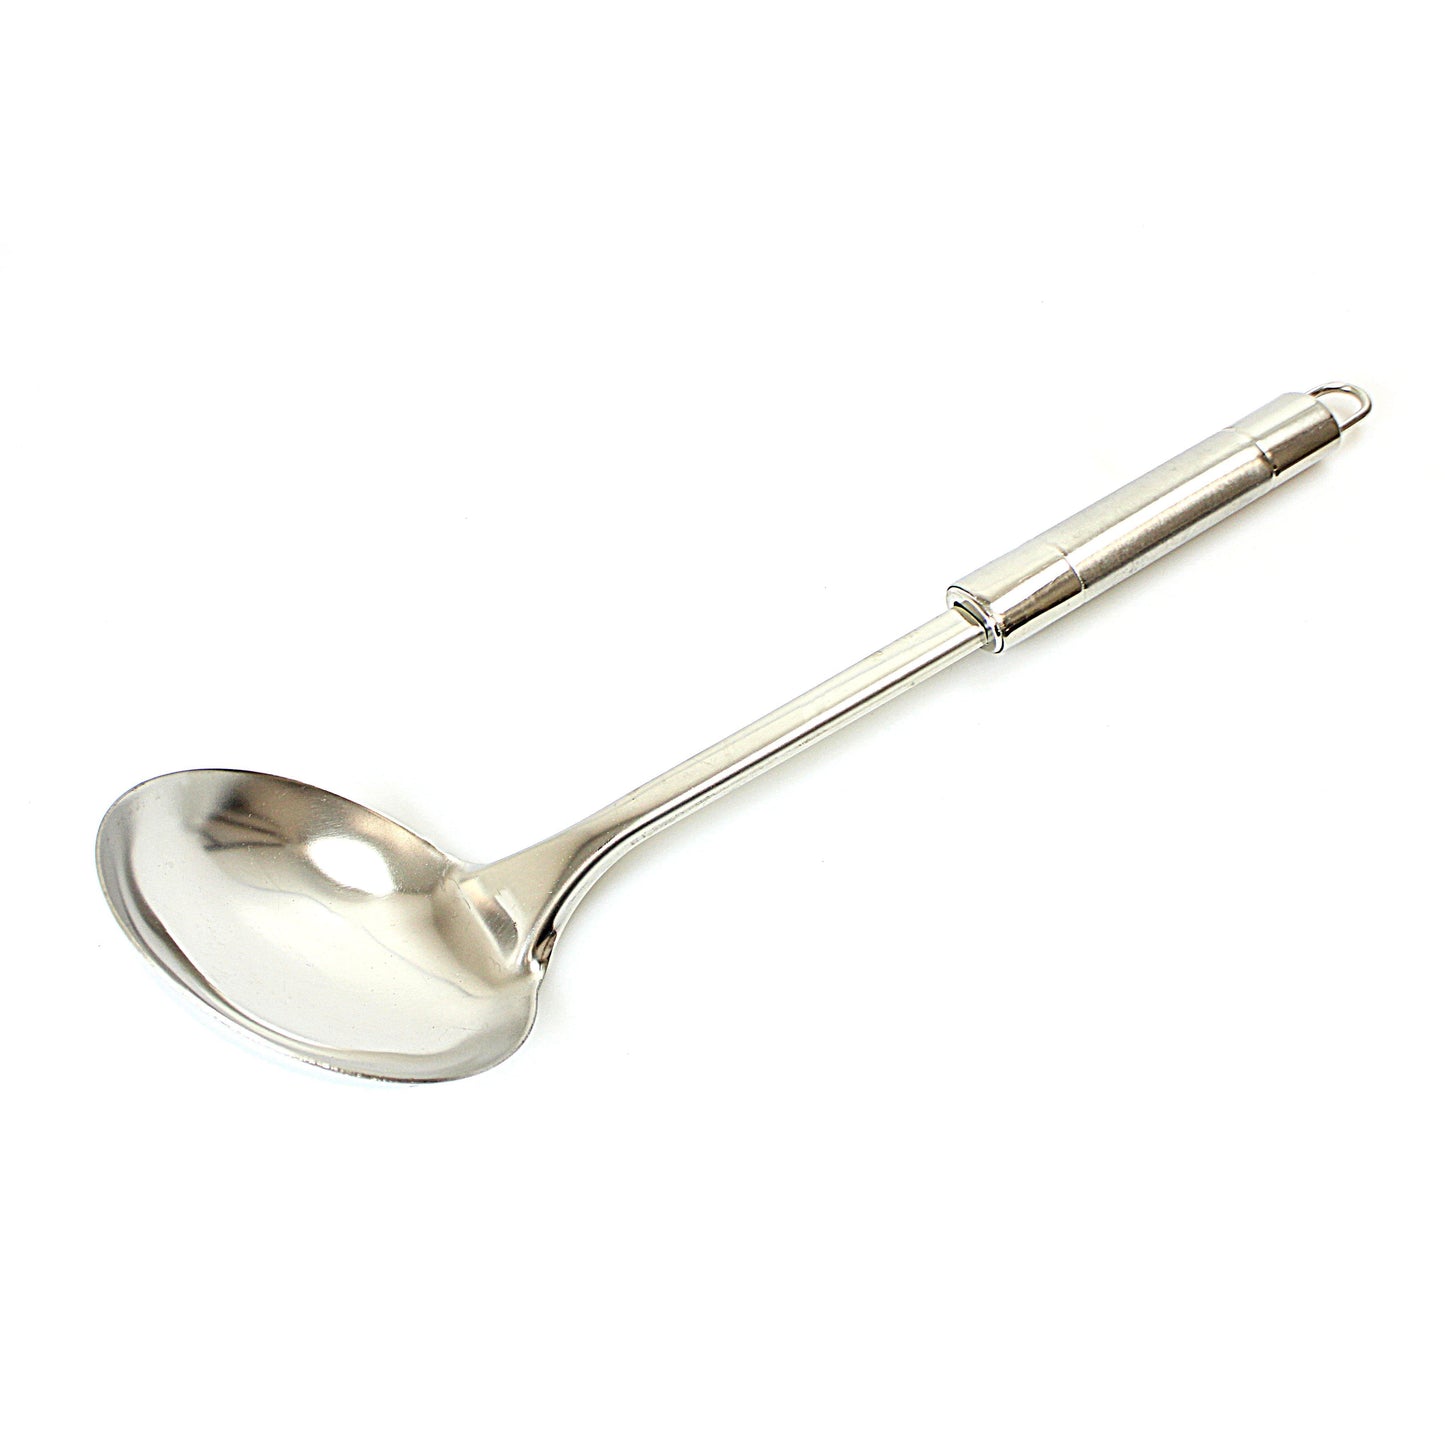 Stainless Steel Kitchen Catering Spoon with Long Handle 3619 (Parcel Rate)